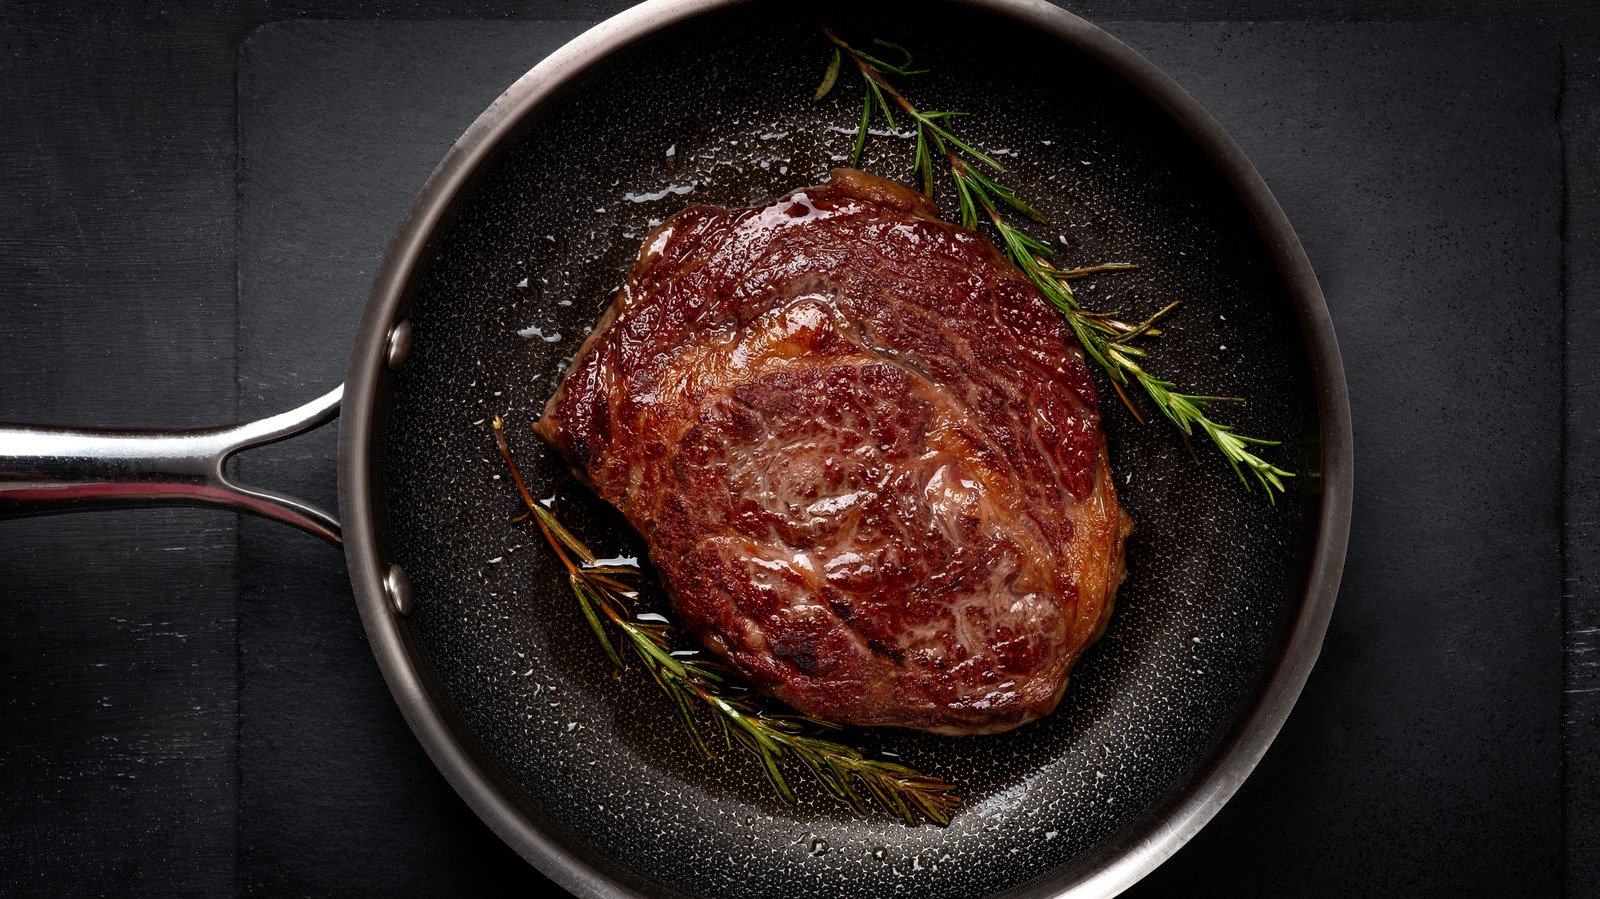 Butter Vs Olive Oil: Which Is Better For Steak?